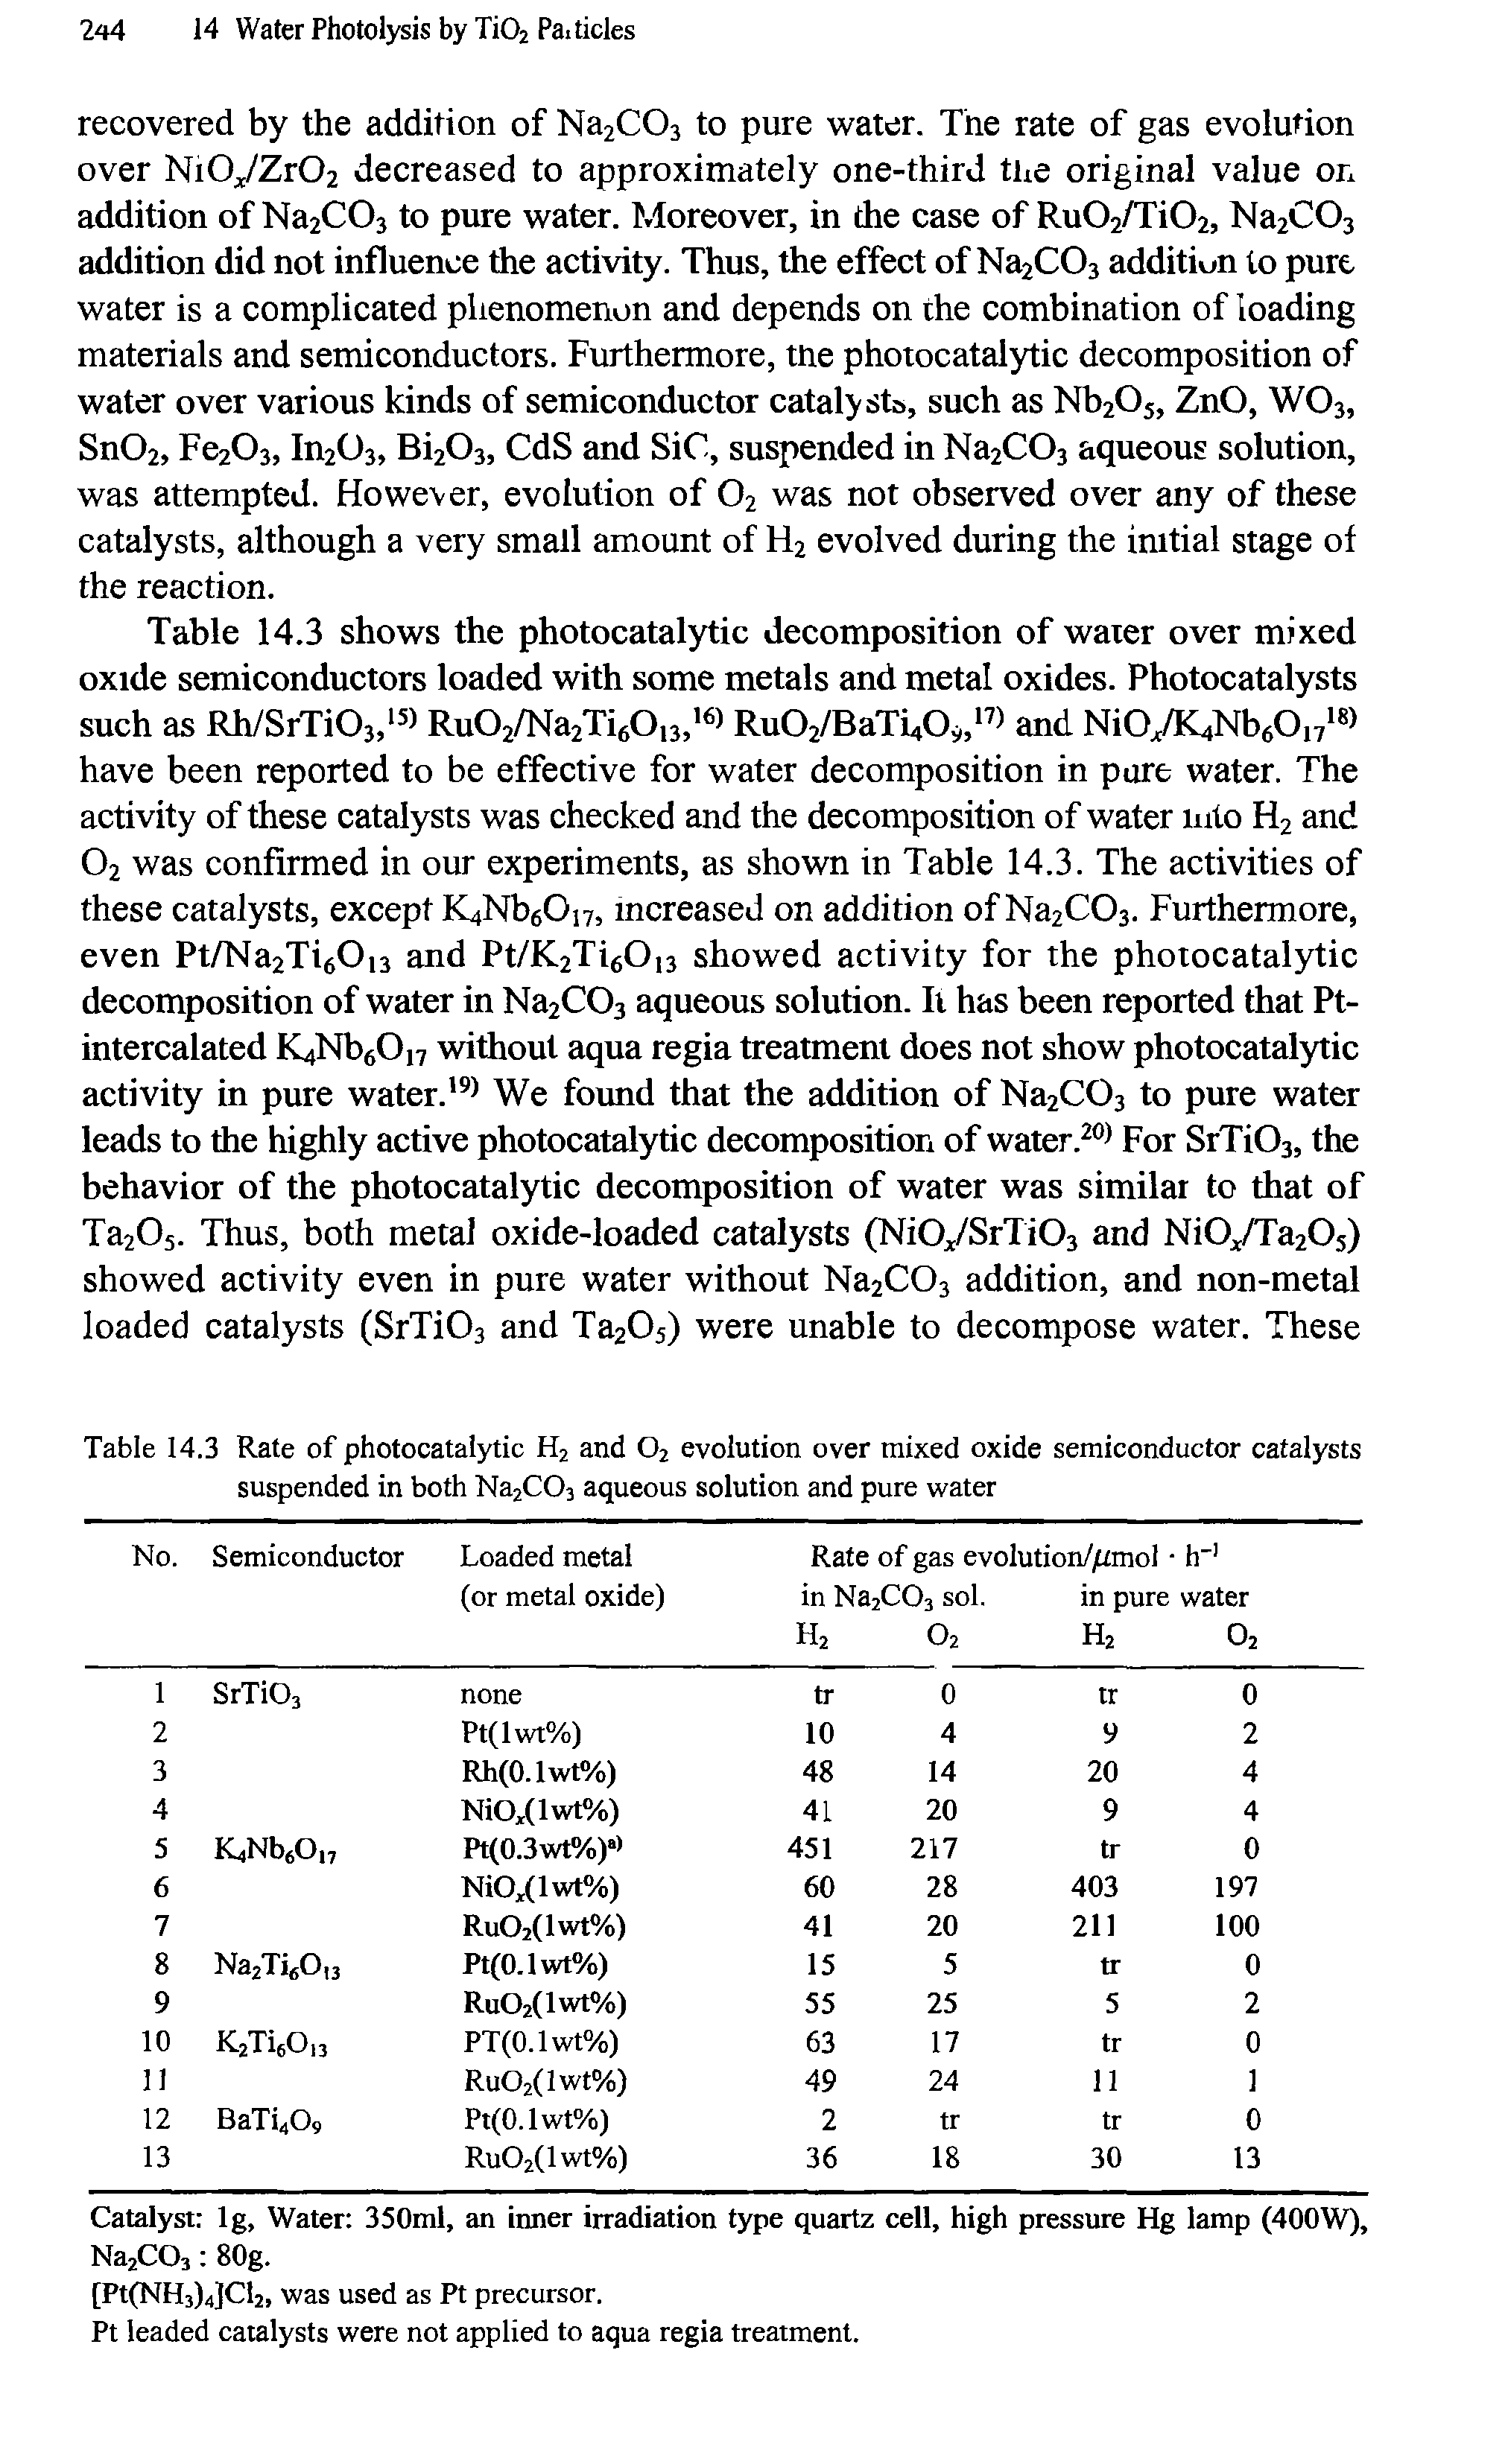 Table 14.3 Rate of photocatalytic H2 and 02 evolution over mixed oxide semiconductor catalysts suspended in both Na2C03 aqueous solution and pure water...